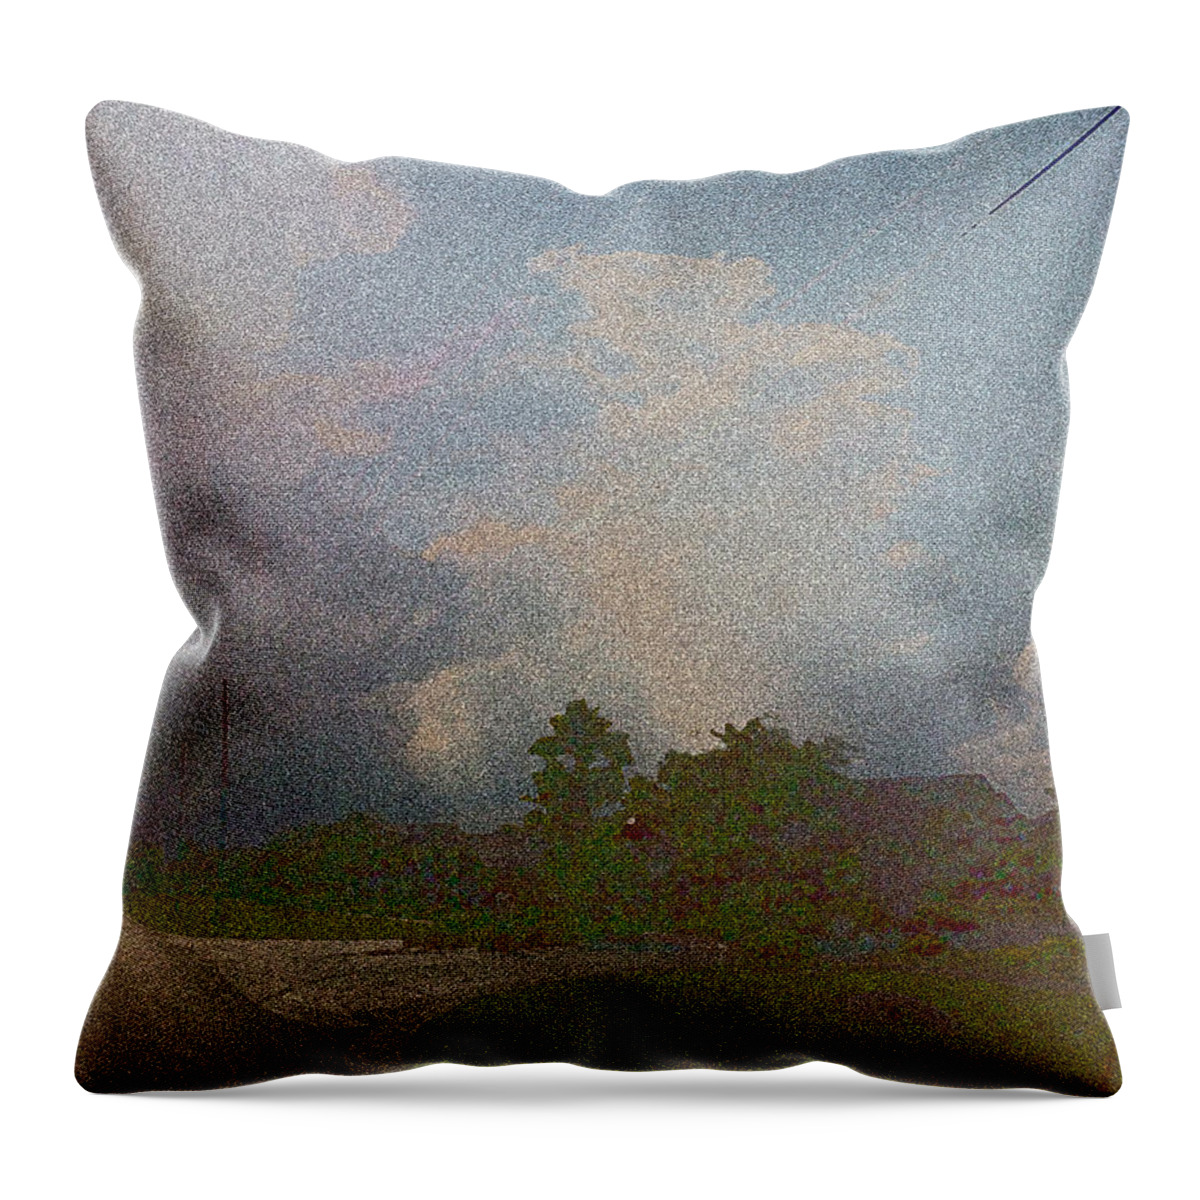 Landscape Throw Pillow featuring the photograph Abstract Landscape 2 by George Pedro